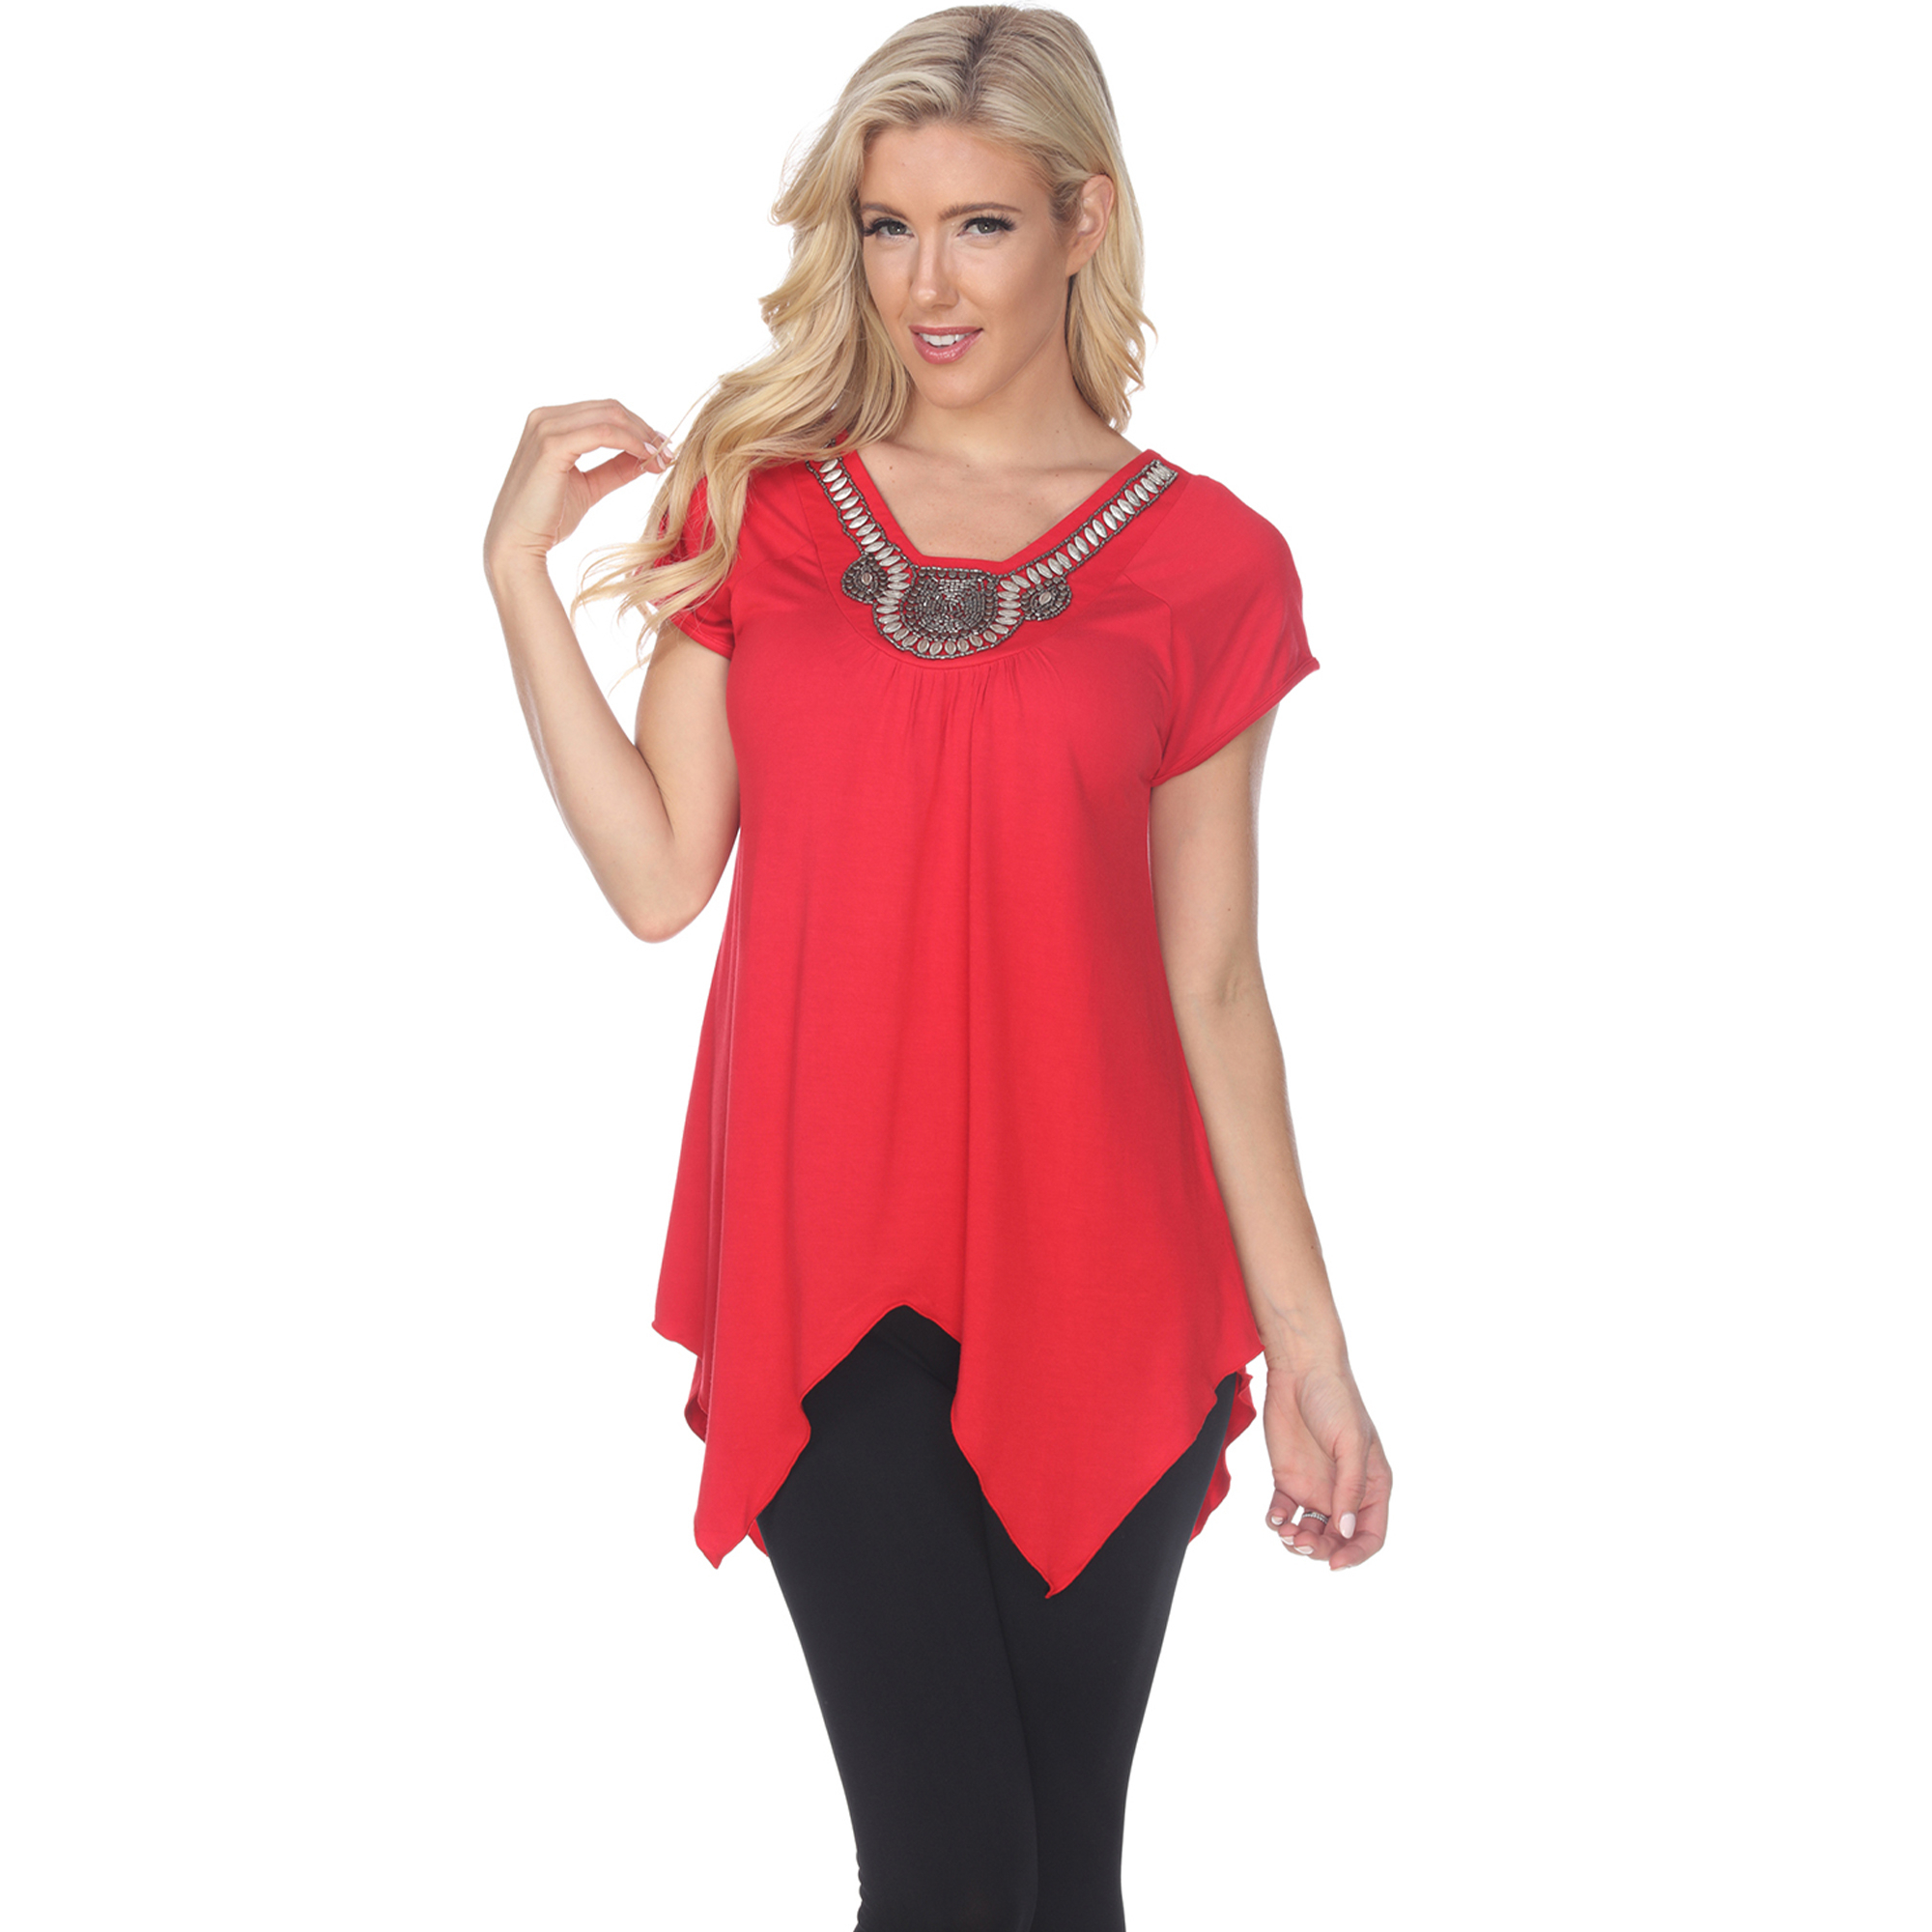 White Mark Women's Embellished Tunic Top - Red, Large